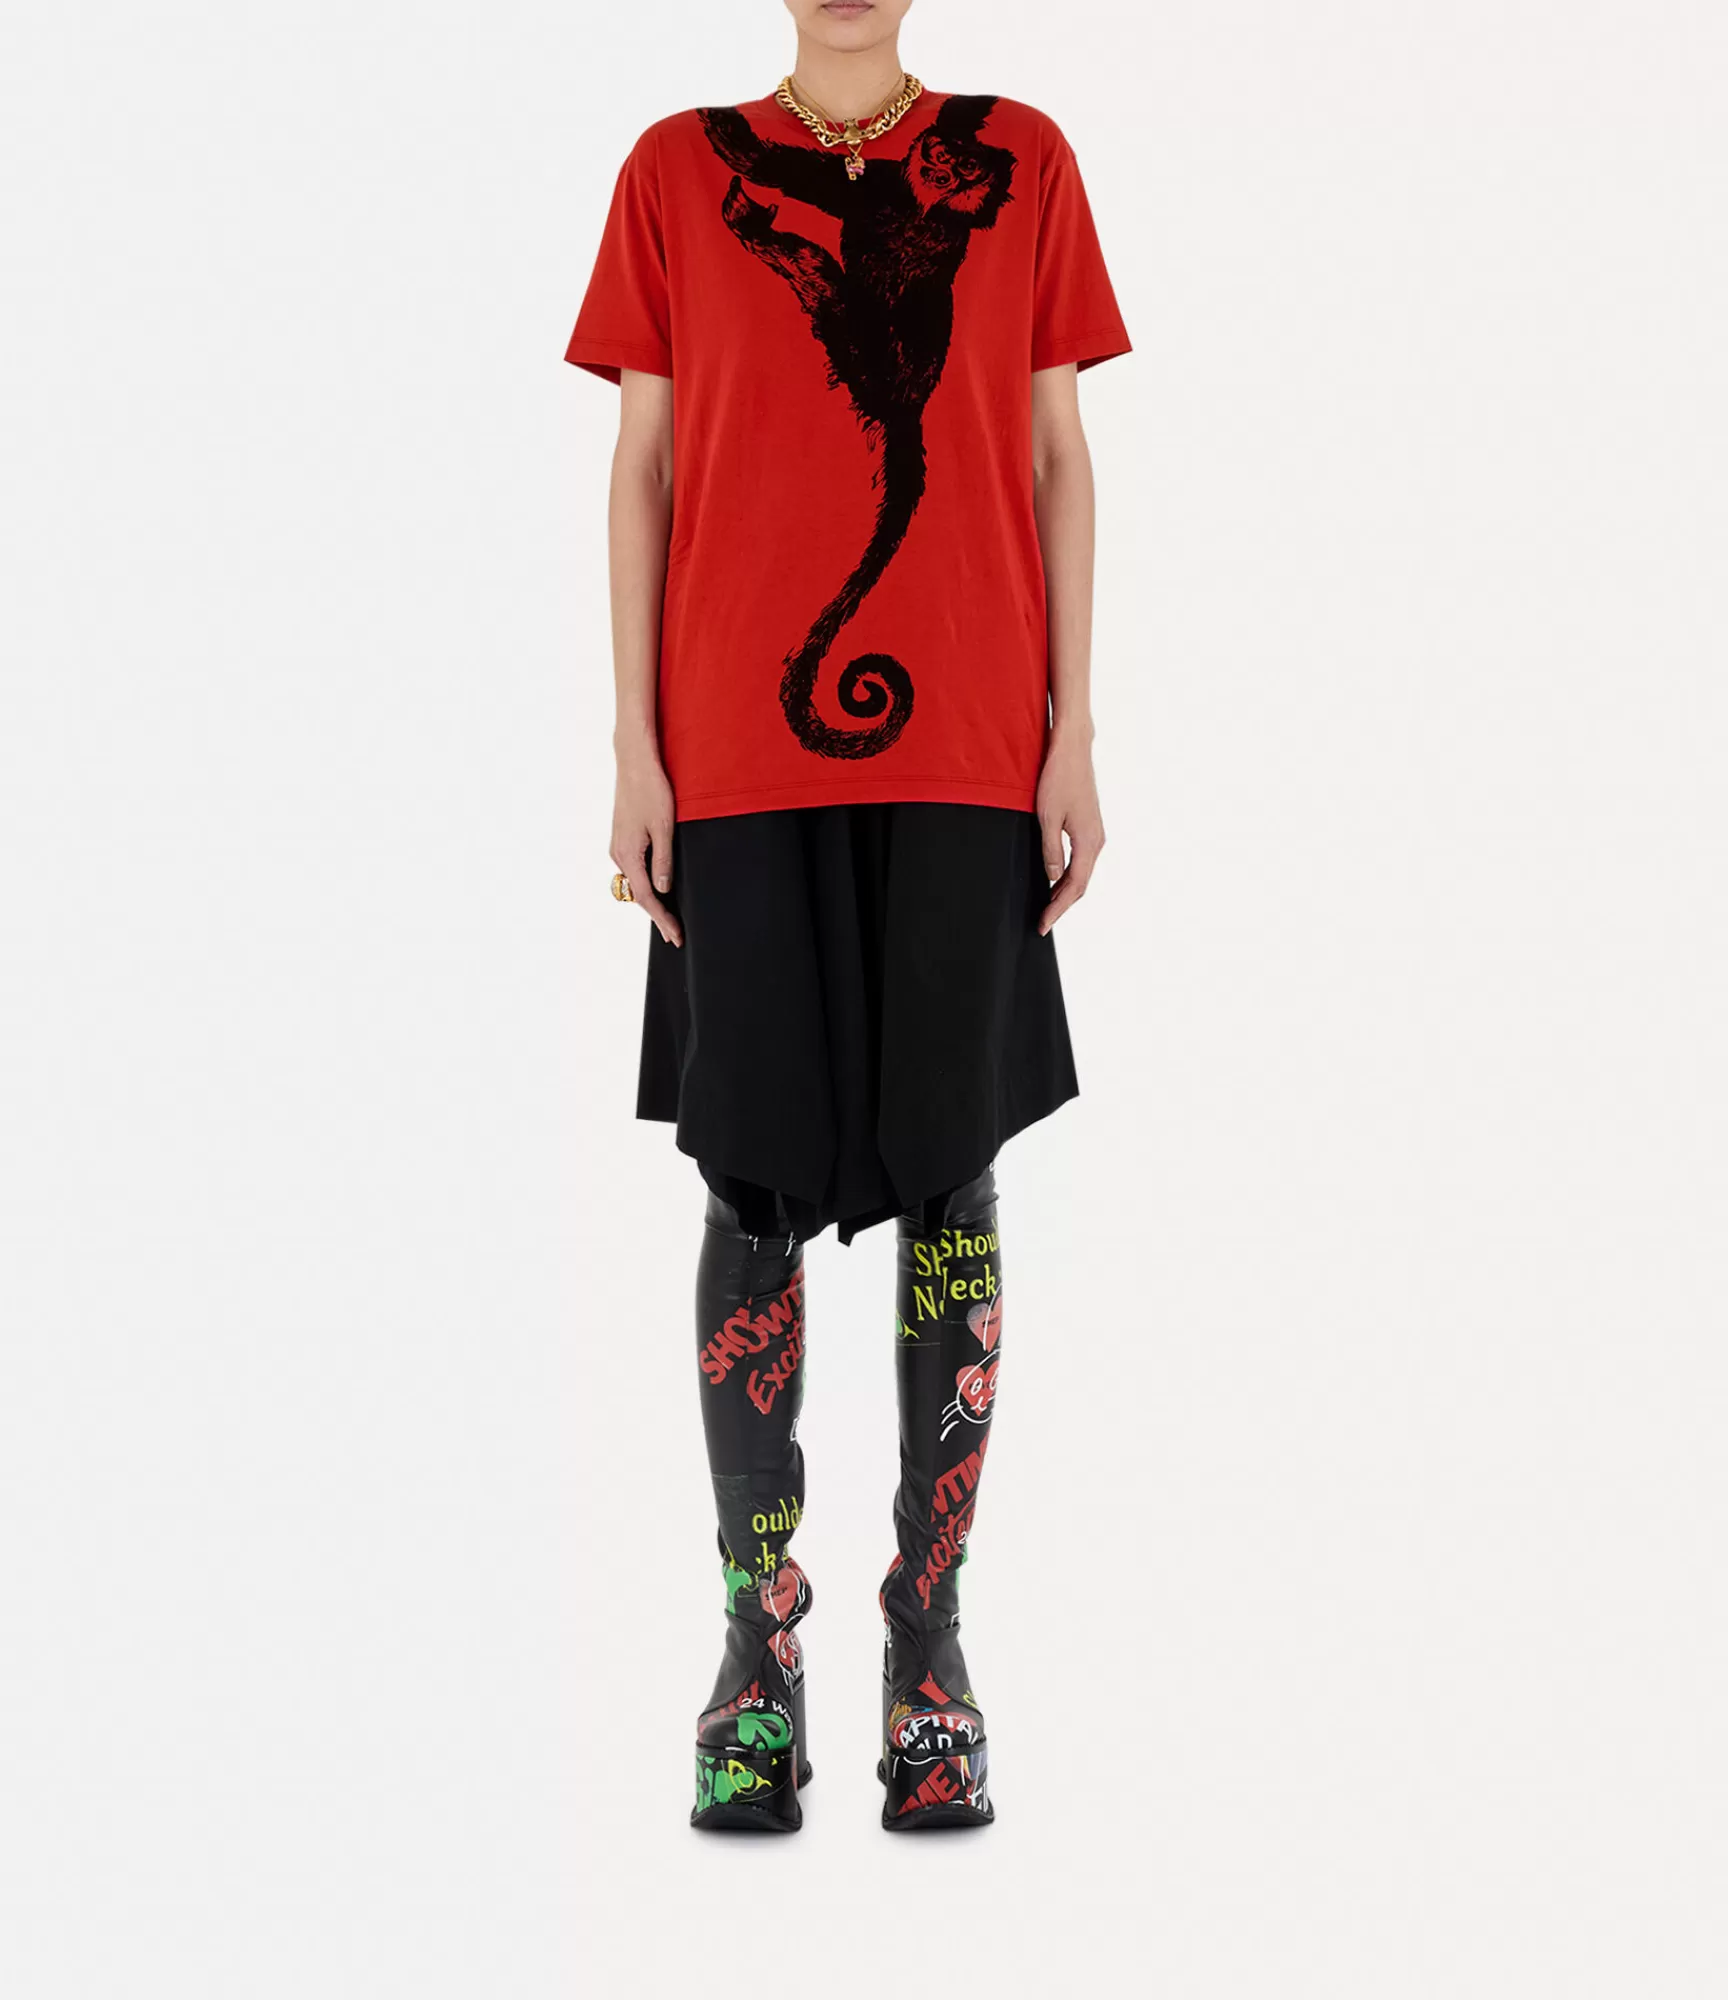 Vivienne Westwood T-Shirts and Polos | Sweatshirts and T-Shirts*MONKEY CLASSIC T-SHIRT Red